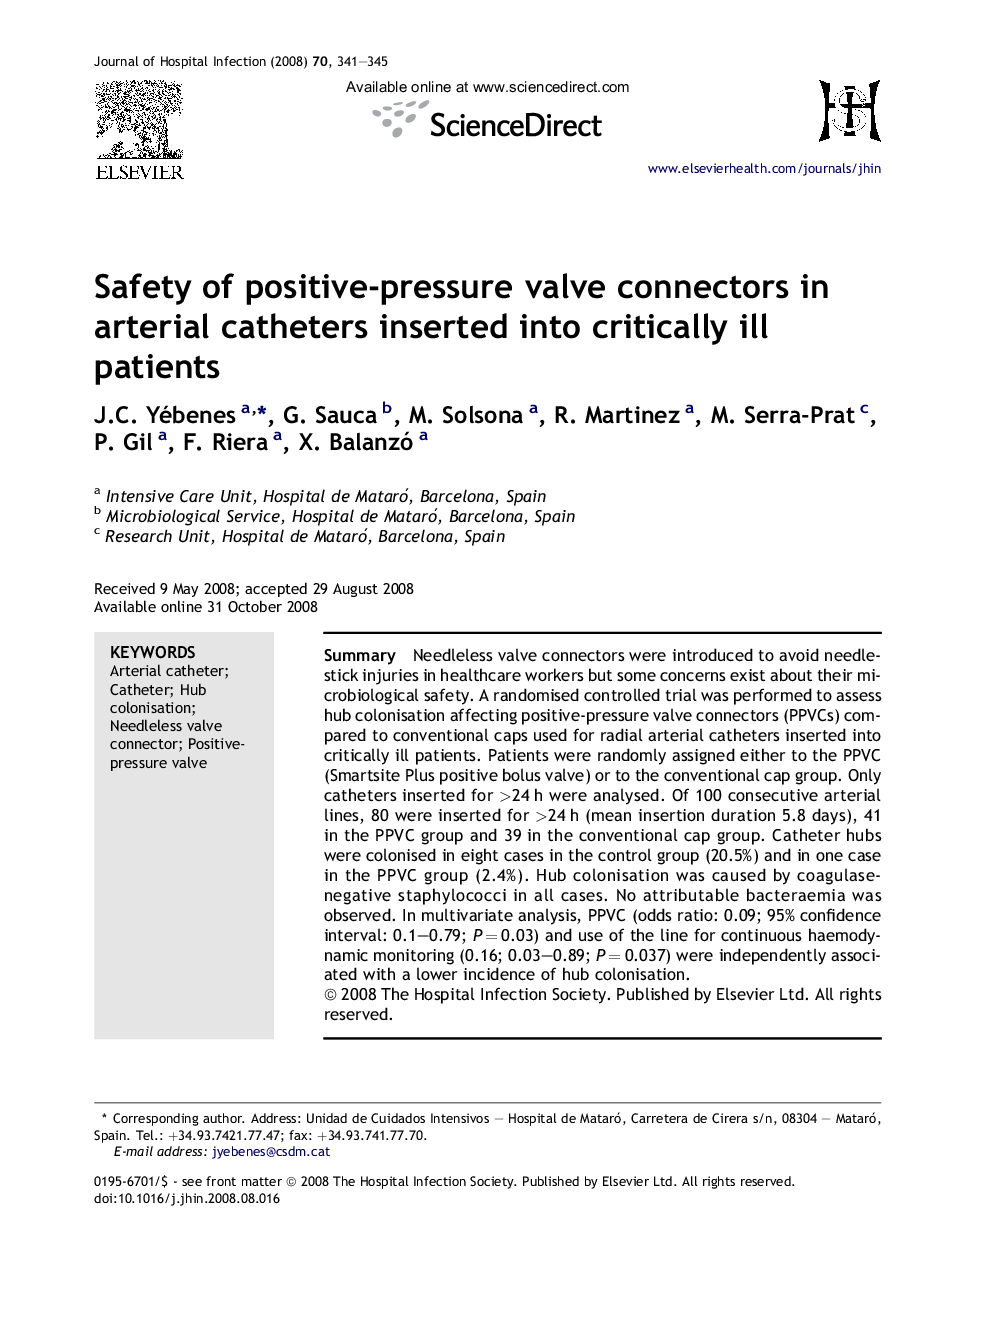 Safety of positive-pressure valve connectors in arterial catheters inserted into critically ill patients